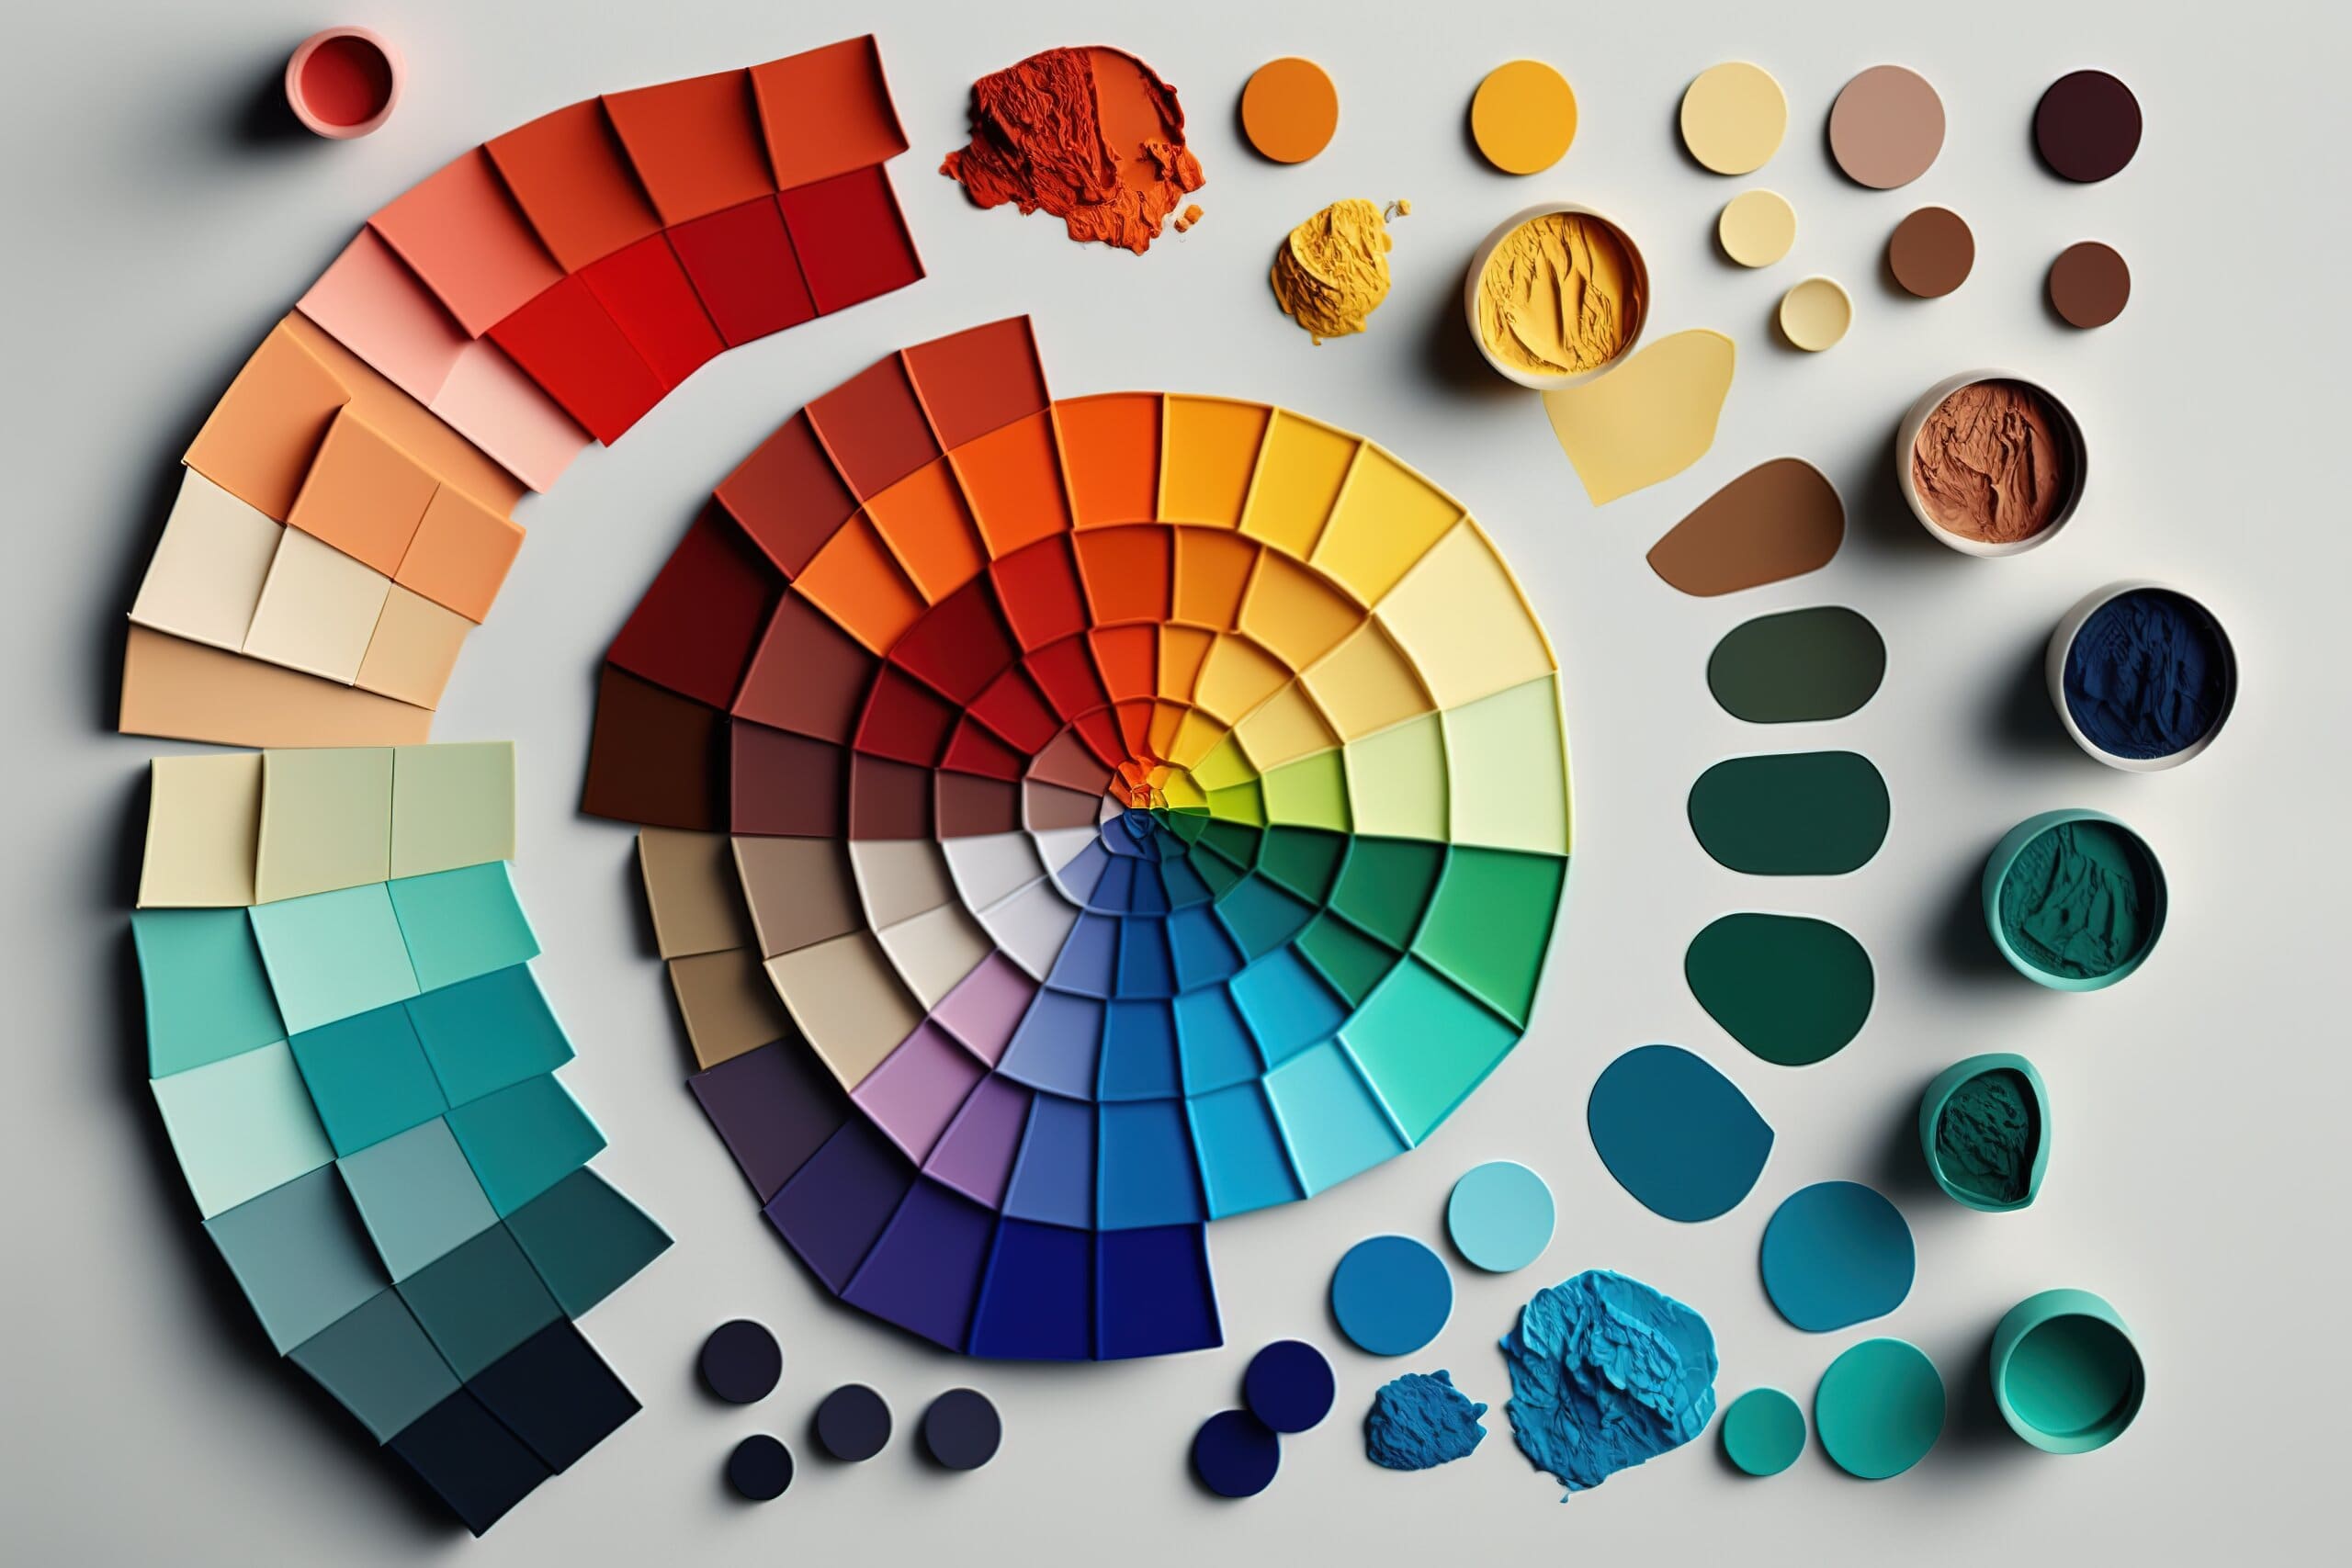 Image of paint and colour cards layed out to demonstrate the colour theory wheel.